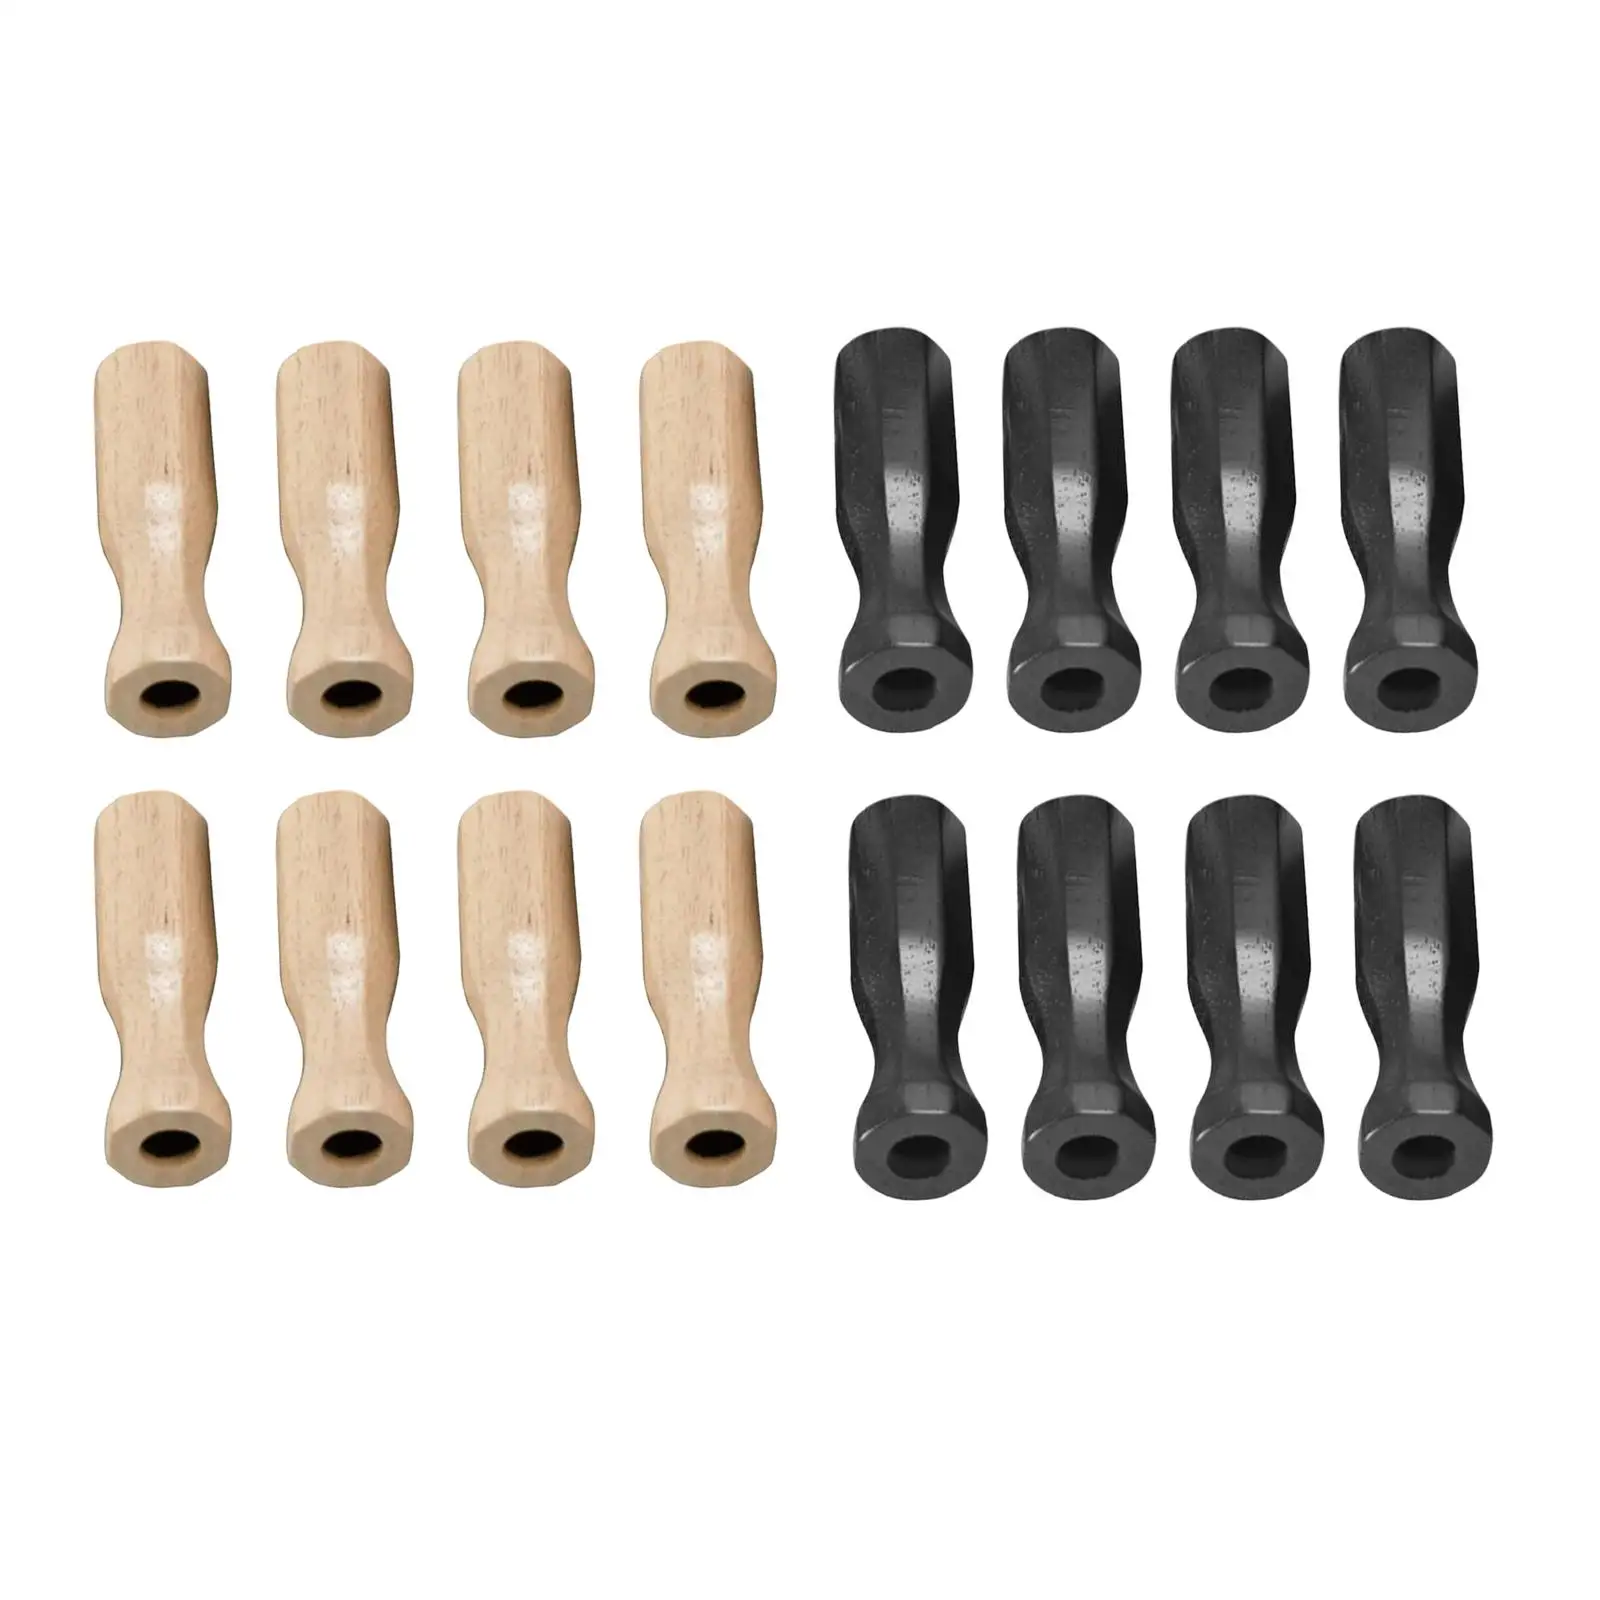 8x Soccer Table Handles Durable Wooden Foosball Handle Rod for Soccer Machine Indoor Table Soccer Standard Foosball Tables